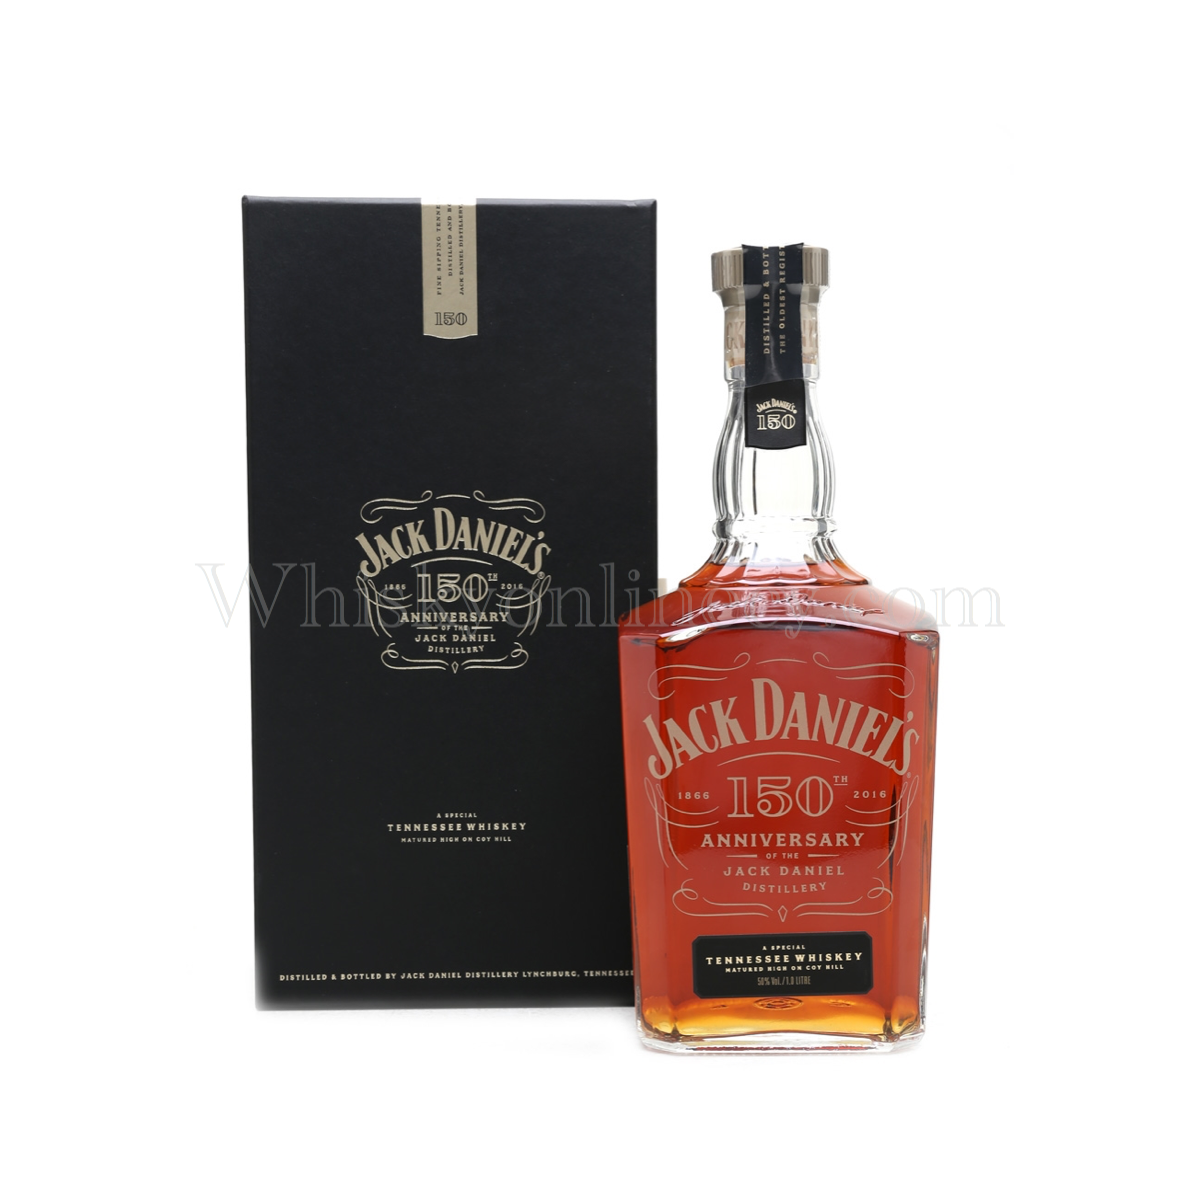 Whisky Online Cyprus - Jack Daniels 150th Anniversary of the Distillery  Special Edition Release 2016 (1L, 50%)